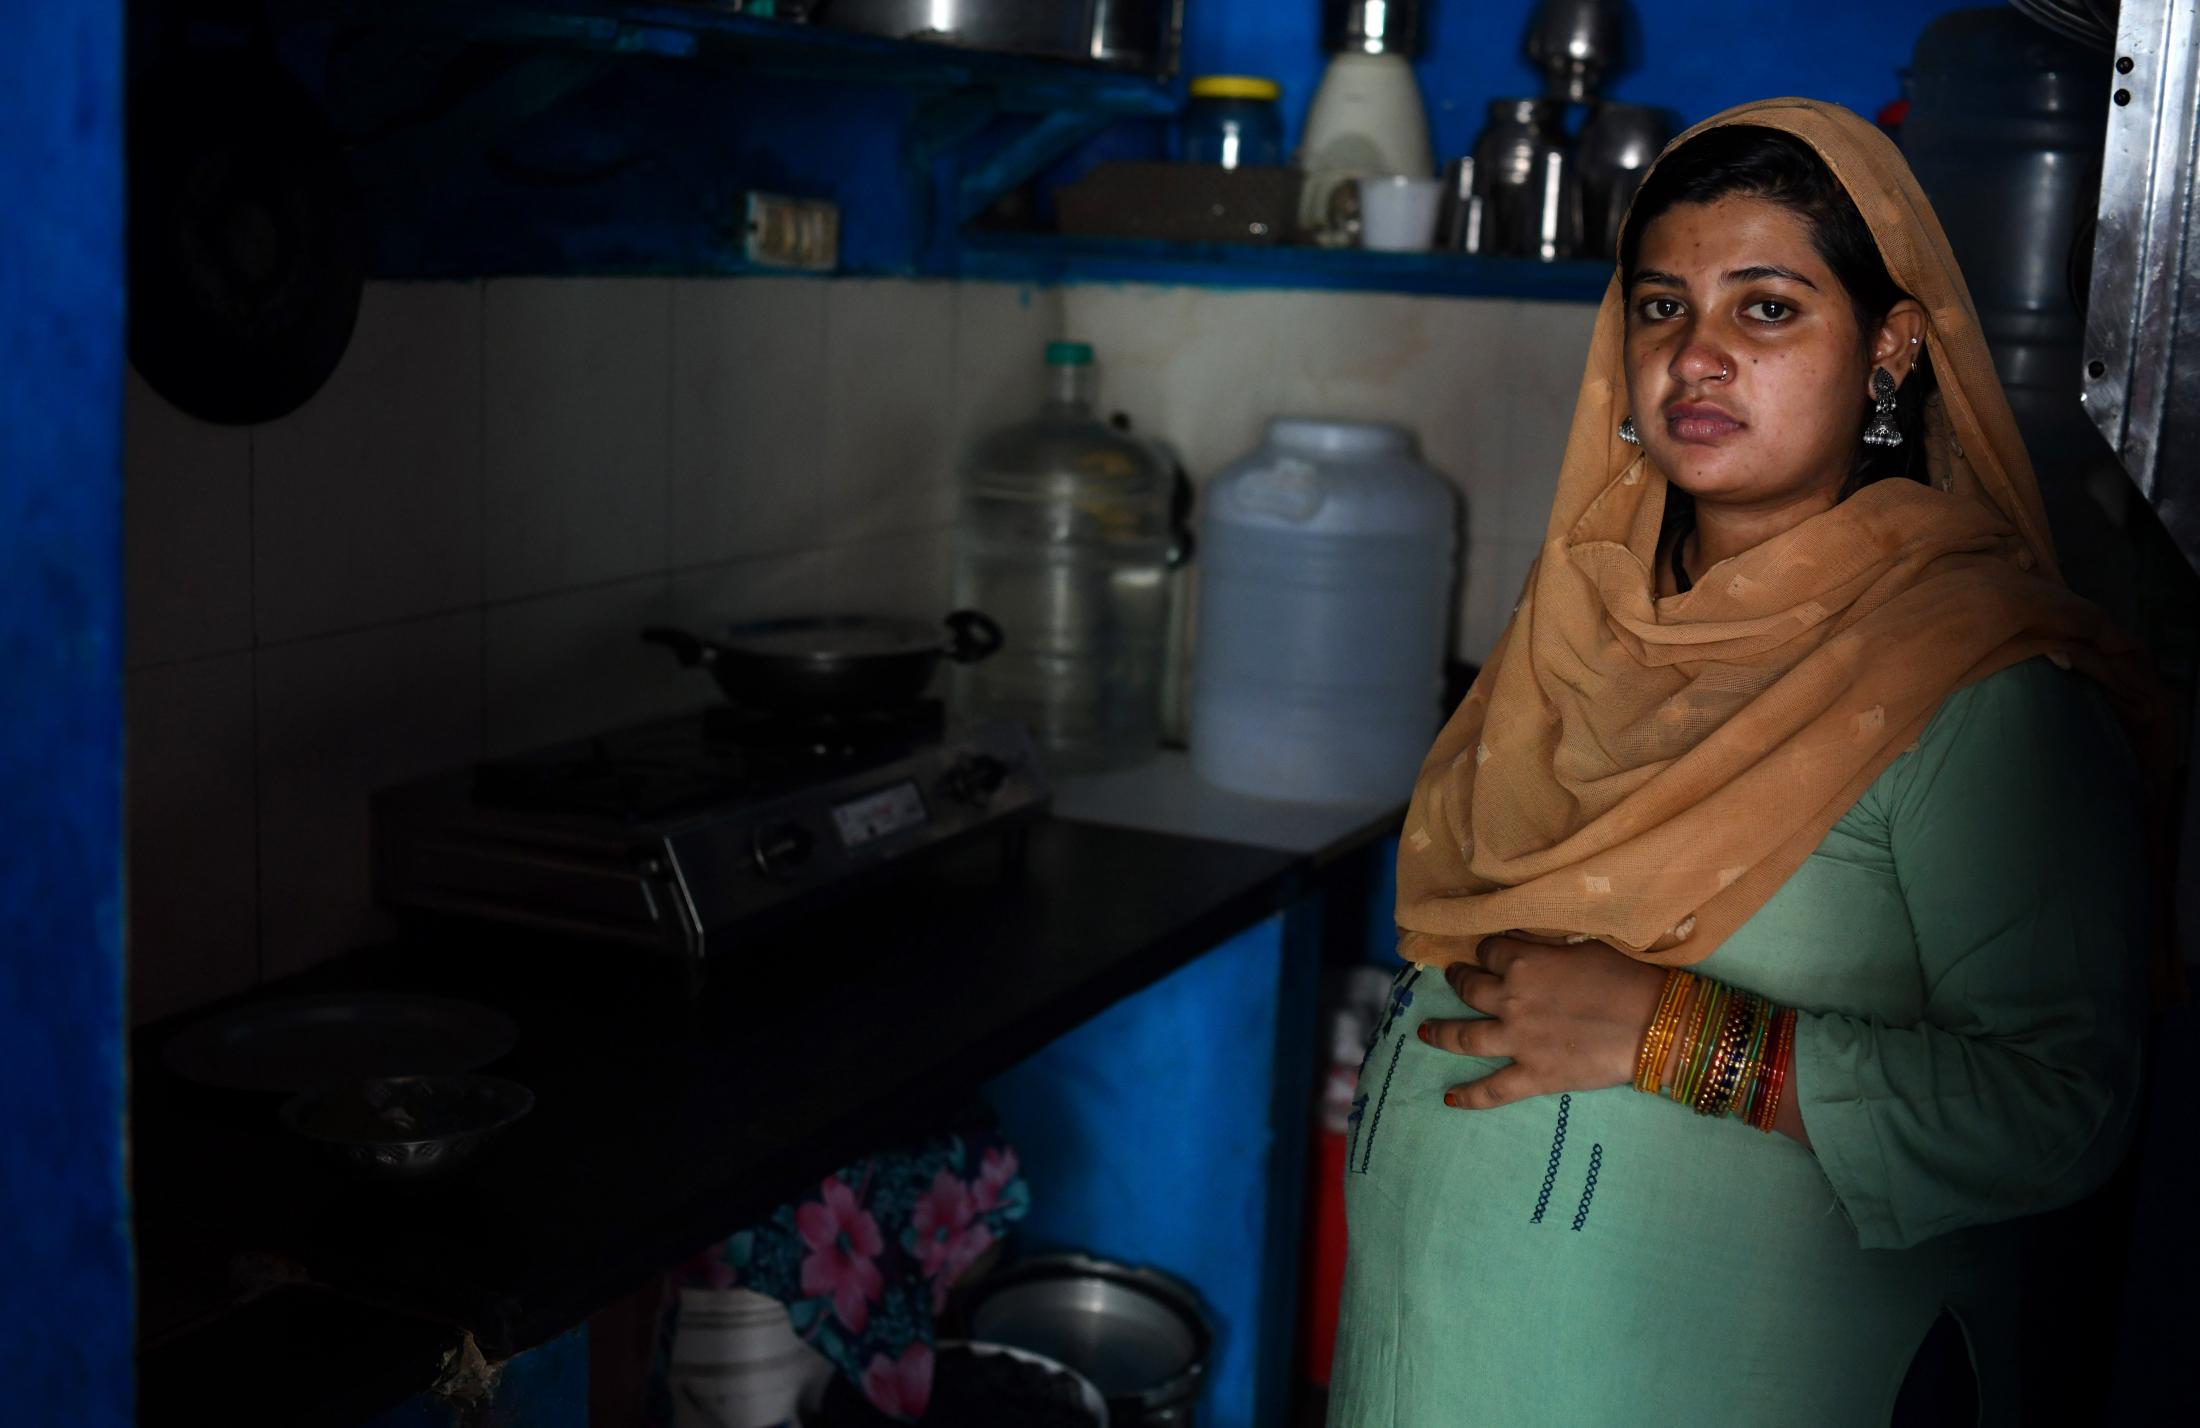 Simran (19) got married a year ago and moved into her mother&rsquo;s house before the lockdown was announced during the second wave. She said &ldquo;My husband&rsquo;s house is 10 kms from here and visits me for a few hours every 15 days or so. I miss him and wish he could be around more during the last stages of my pregnancy.&rdquo;